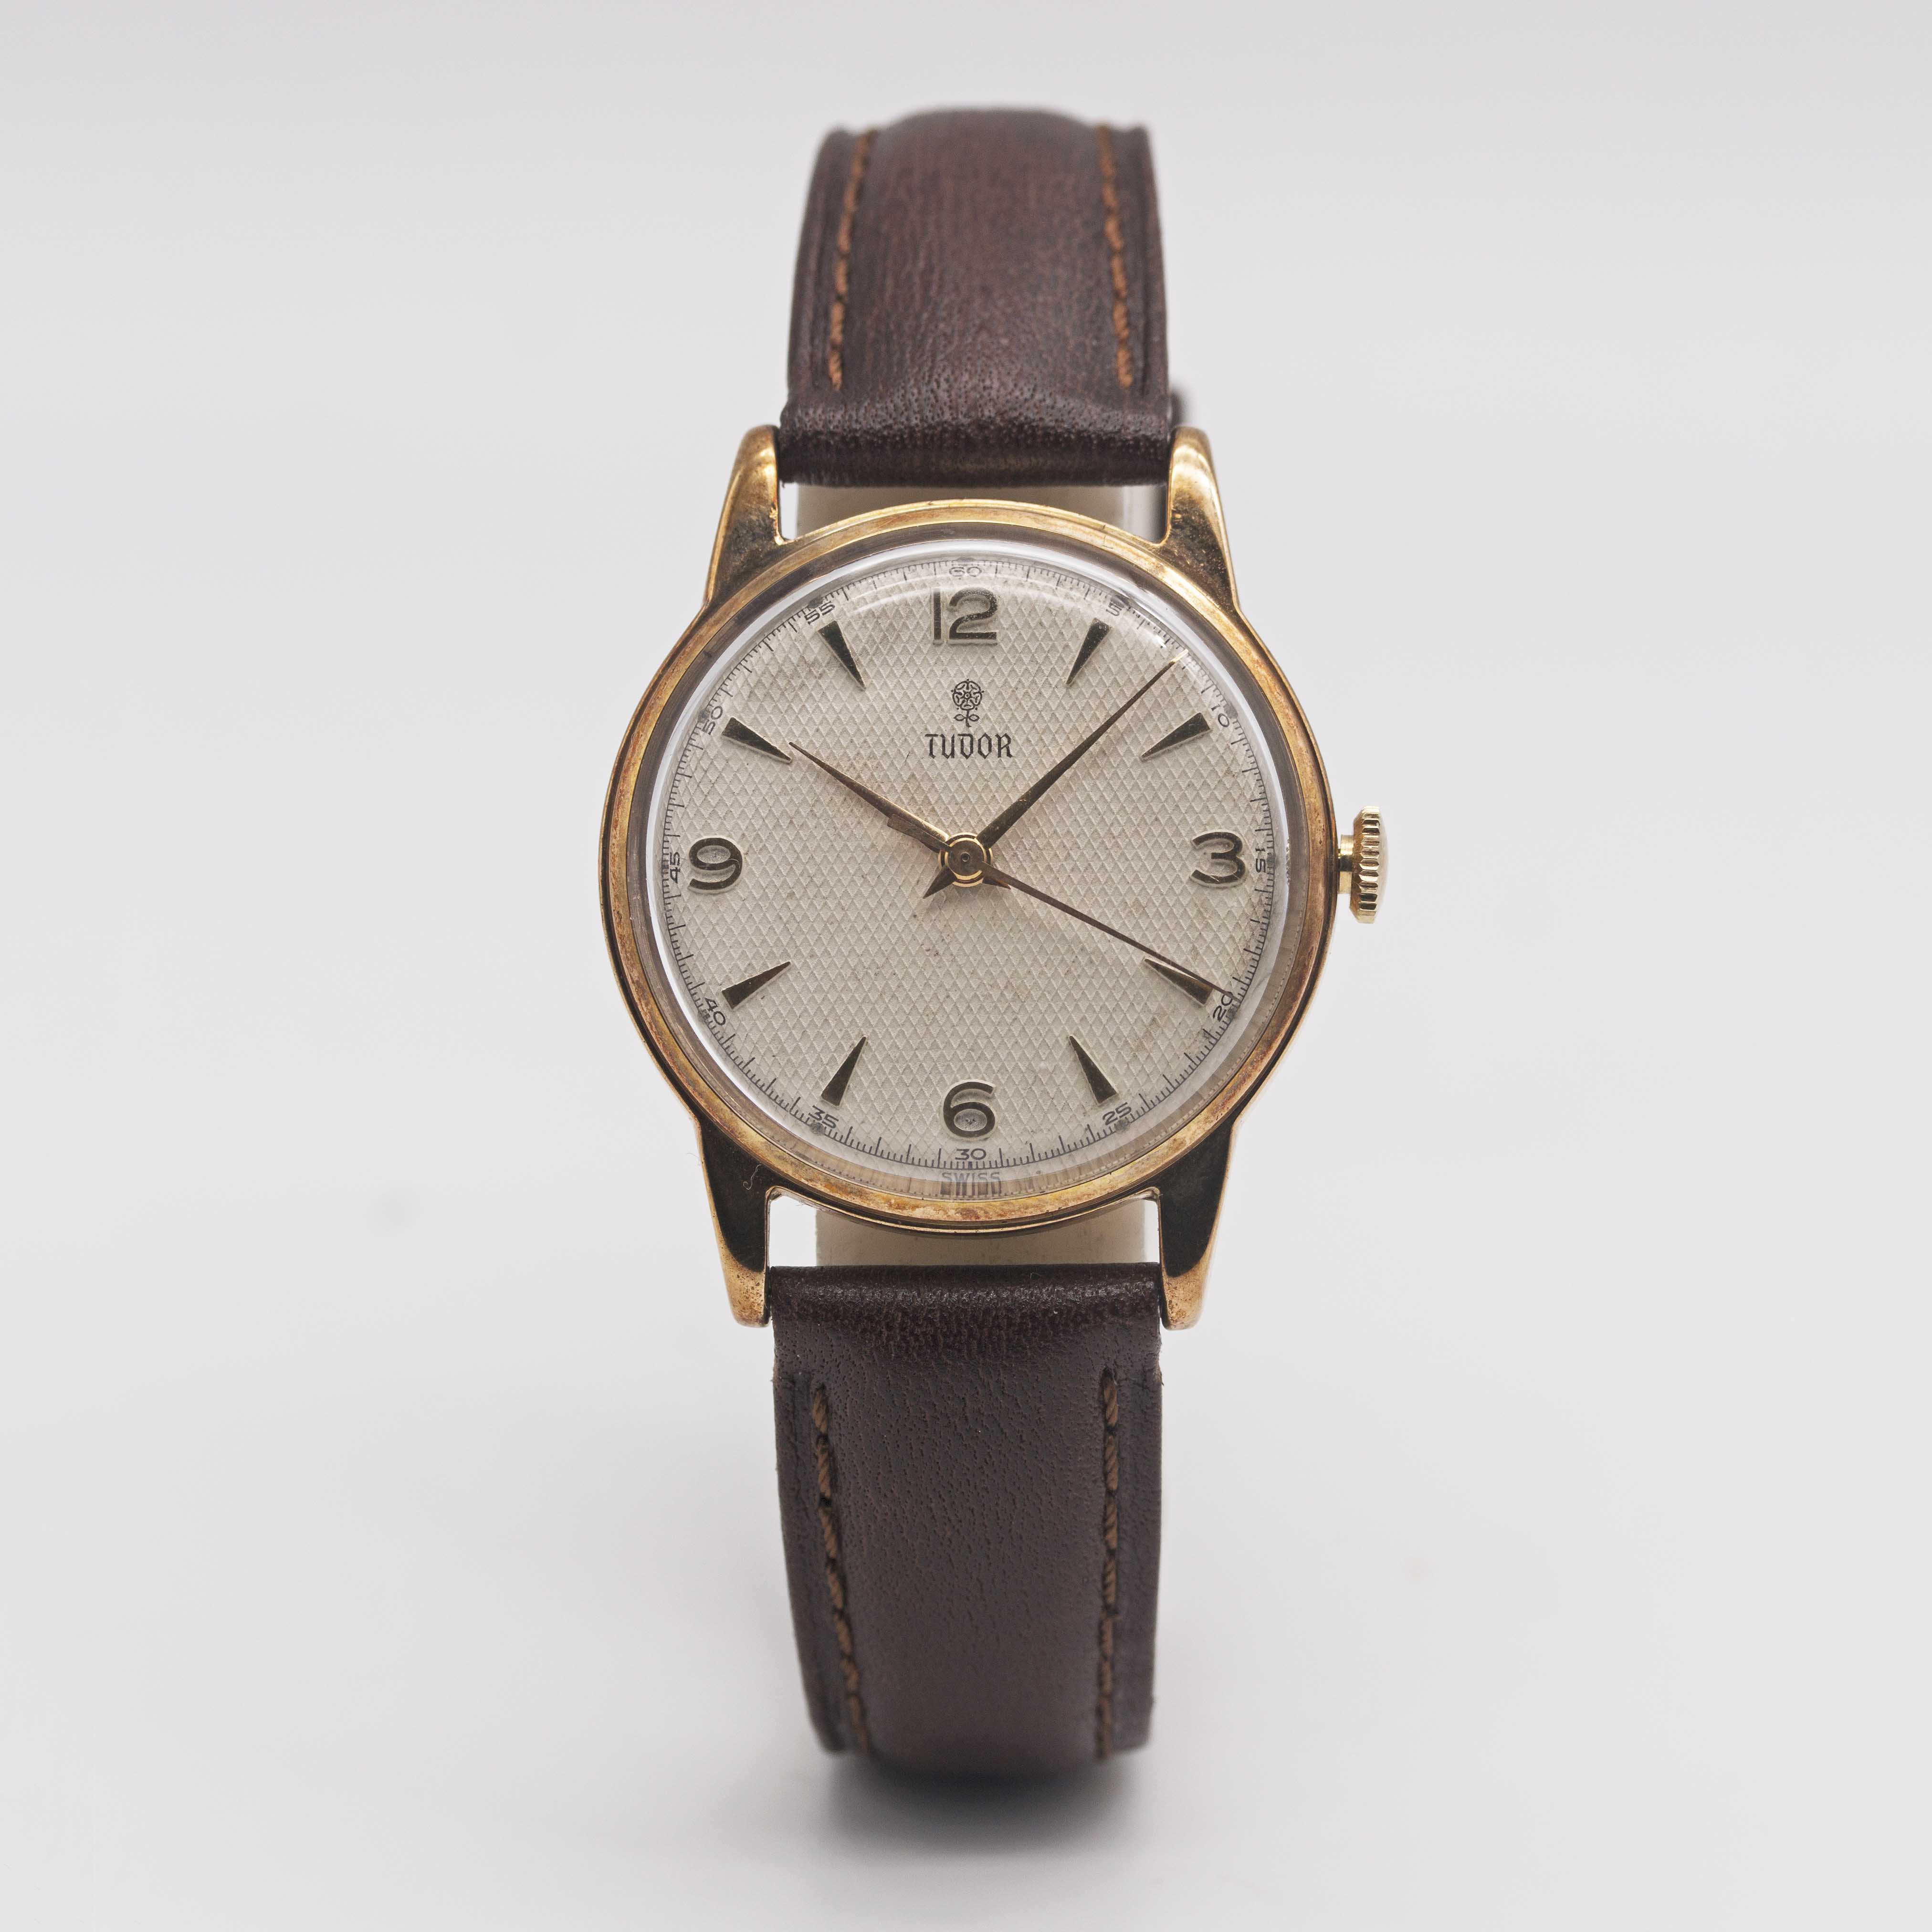 A GENTLEMAN'S 9CT SOLID GOLD ROLEX TUDOR WRIST WATCH CIRCA 1950s, REF. 12856 WITH SILVER "HONEYCOMB" - Image 2 of 10